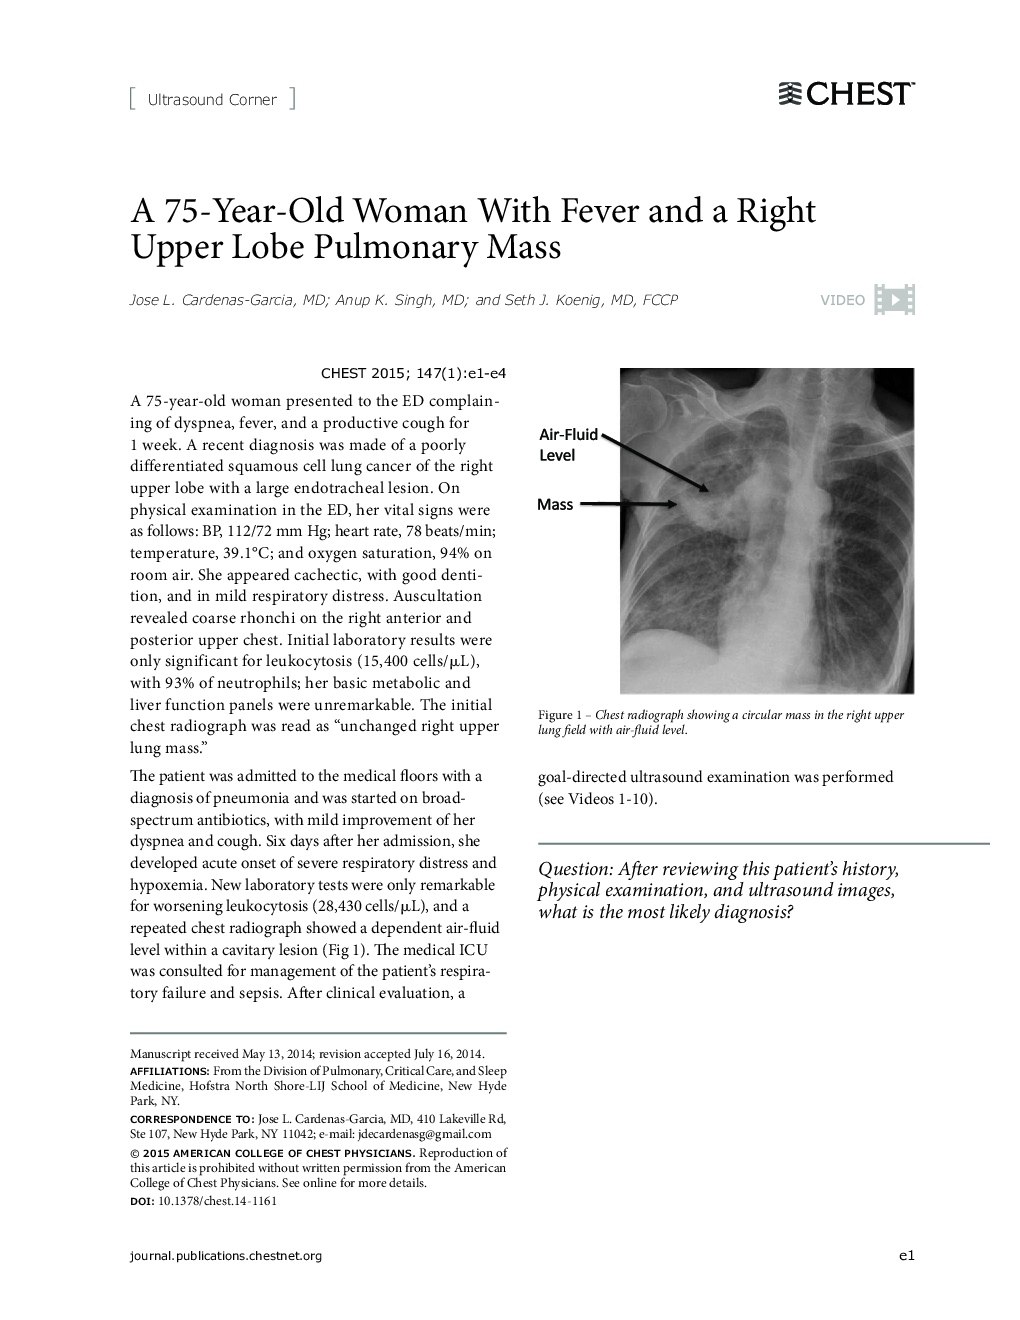 A 75-Year-Old Woman With Fever and a Right Upper Lobe Pulmonary Mass